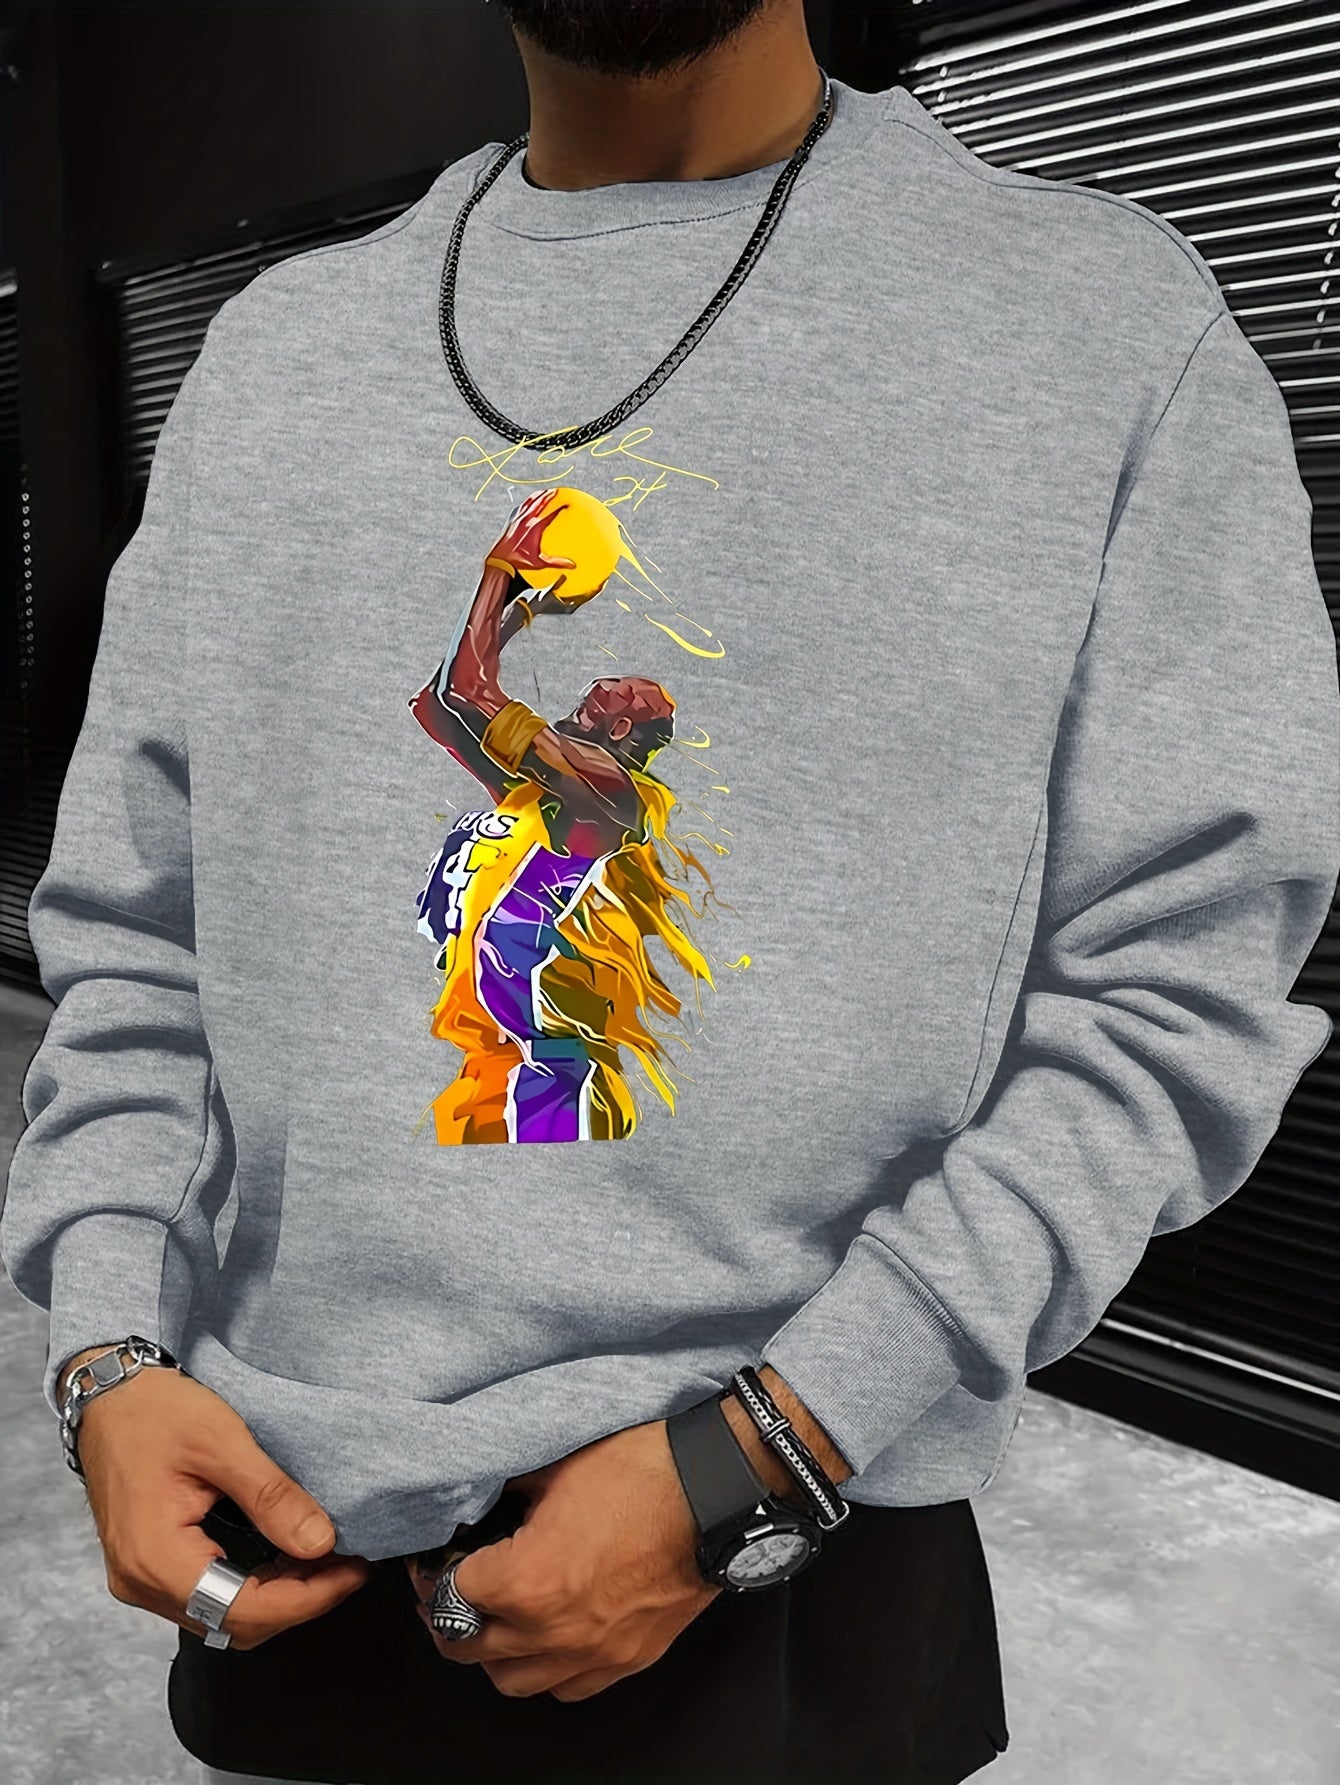 Fashionable Men's Casual Basketball Player Pattern Print,Long Sleeve Round Neck Pullover Sweatshirt,Suitable For Outdoor Sports,For Autumn And Winter,Can Be Paired With Hip-hop Necklace,As Gifts